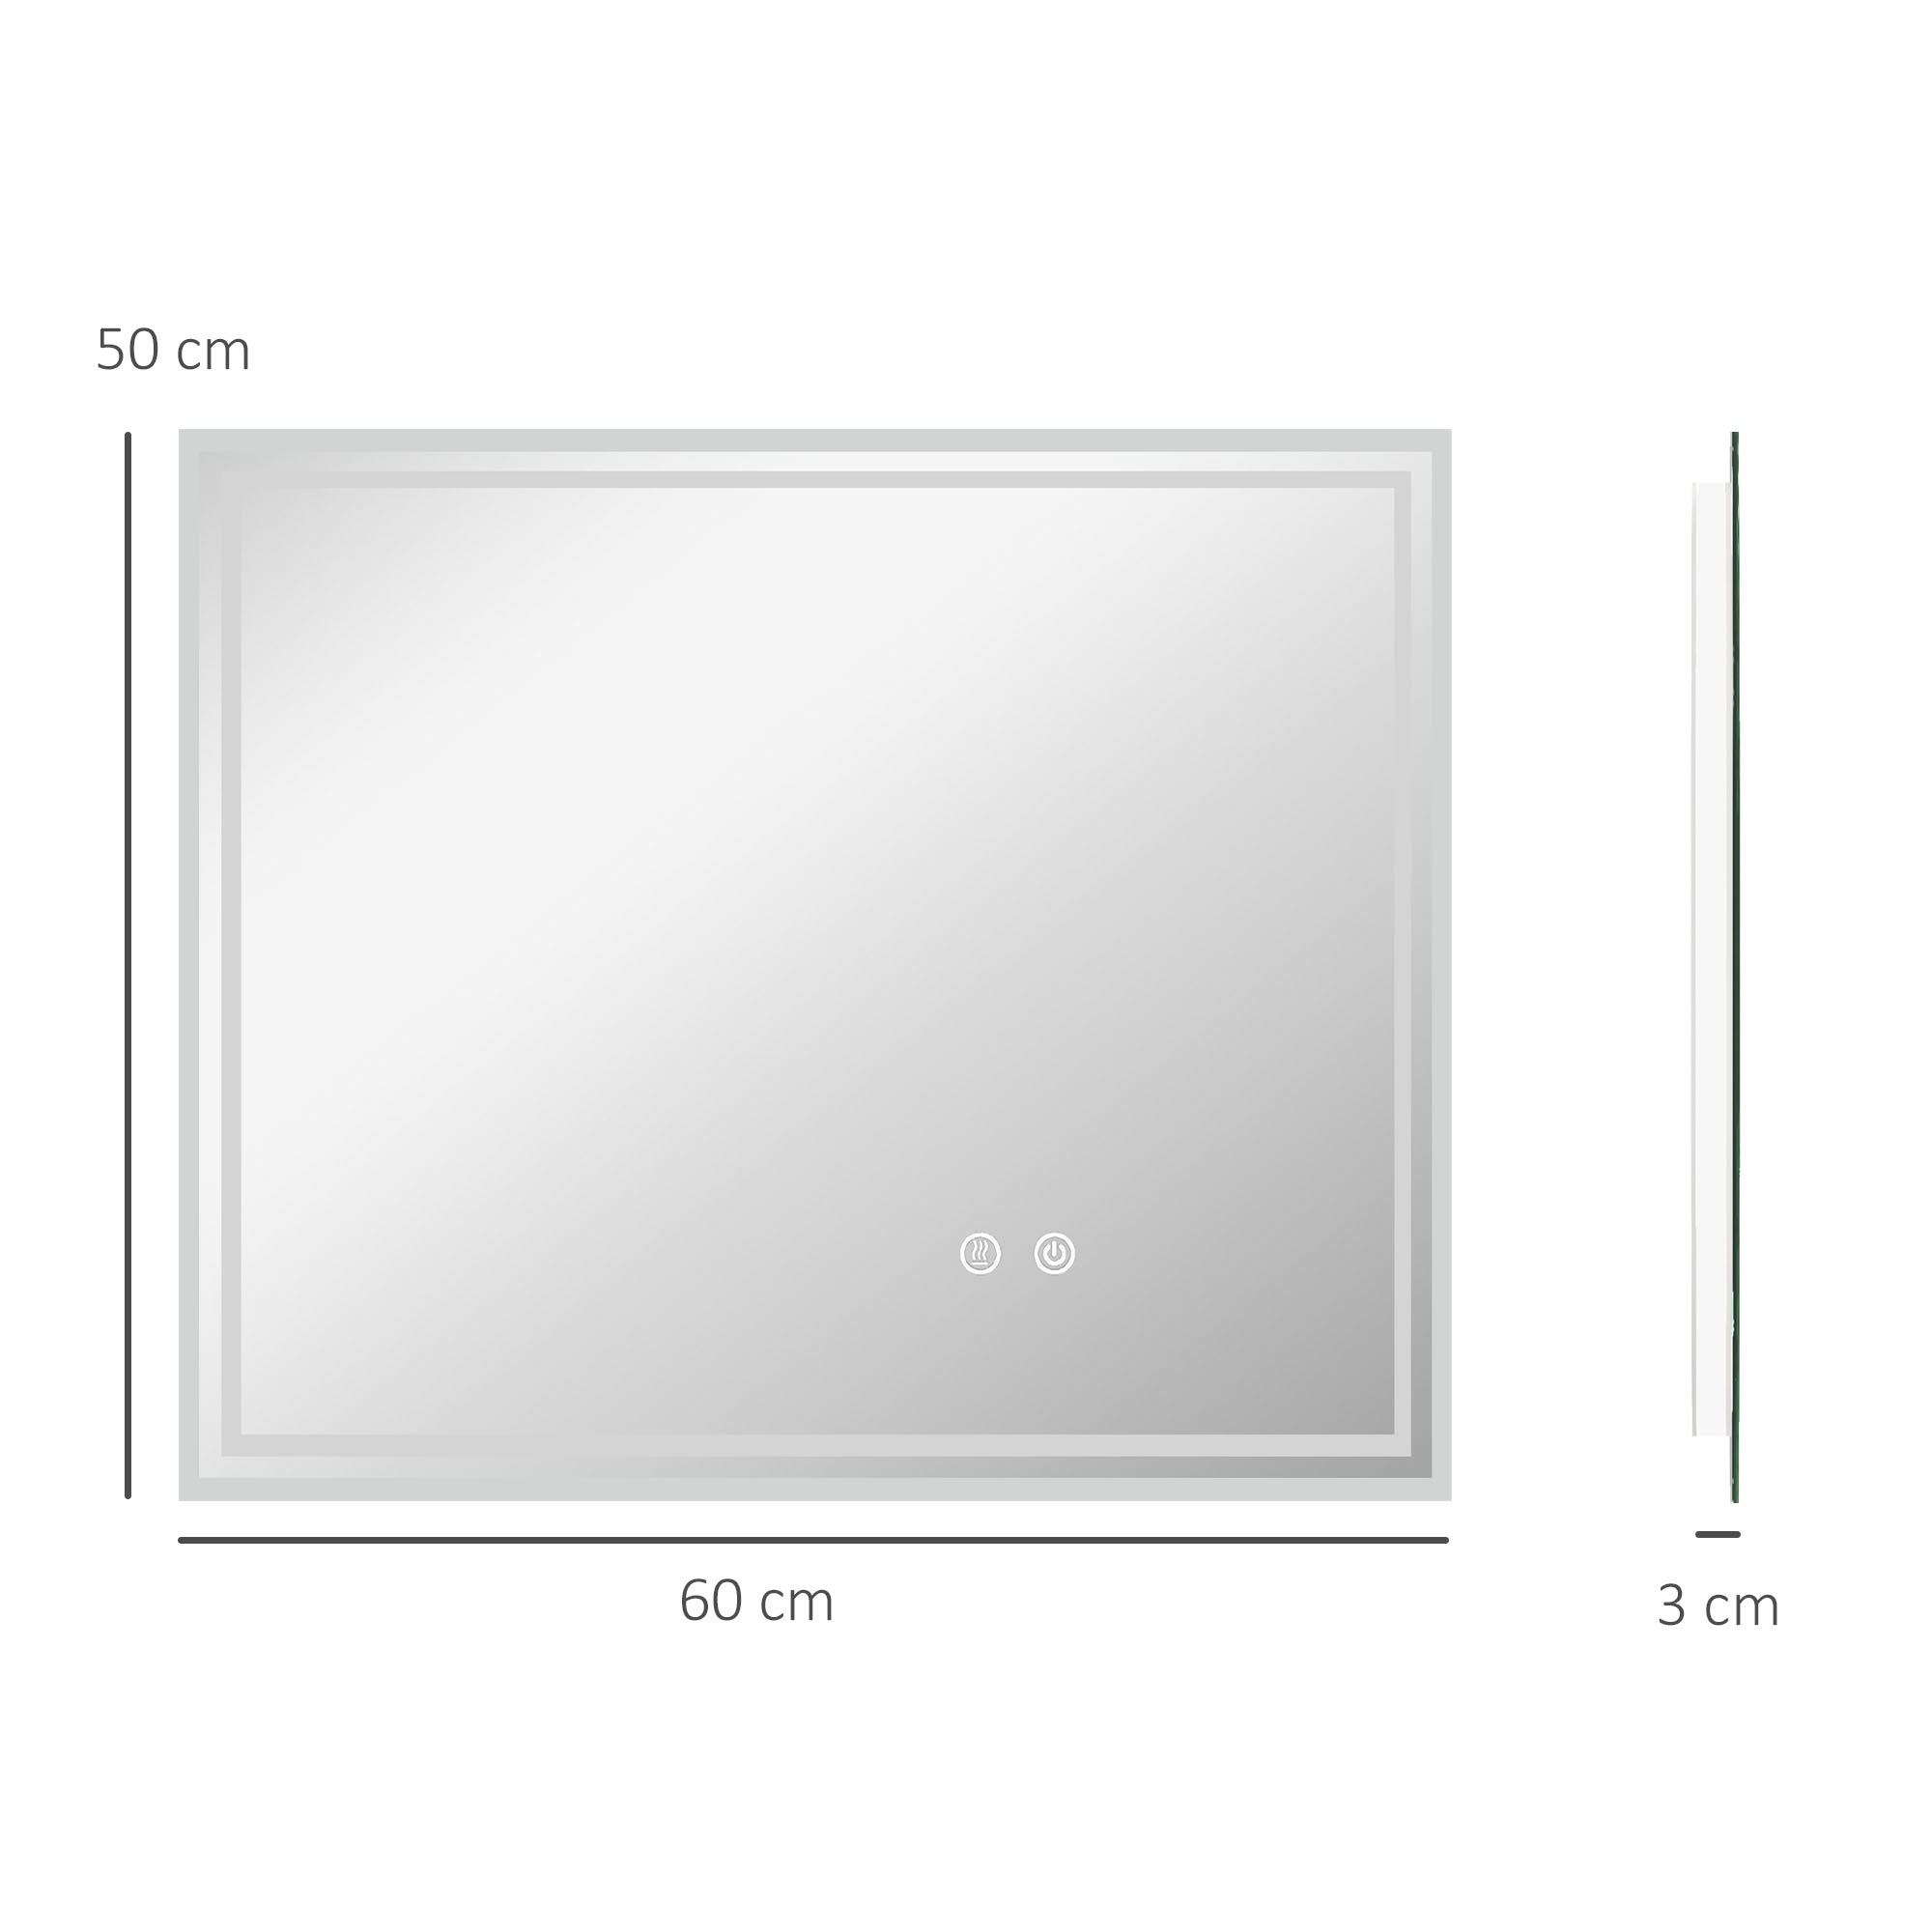 LED Bathroom Mirror with Lights, Illuminated Makeup Mirror, Vanity Mirror with 3 Colour, Smart Touch, Anti-Fog-2